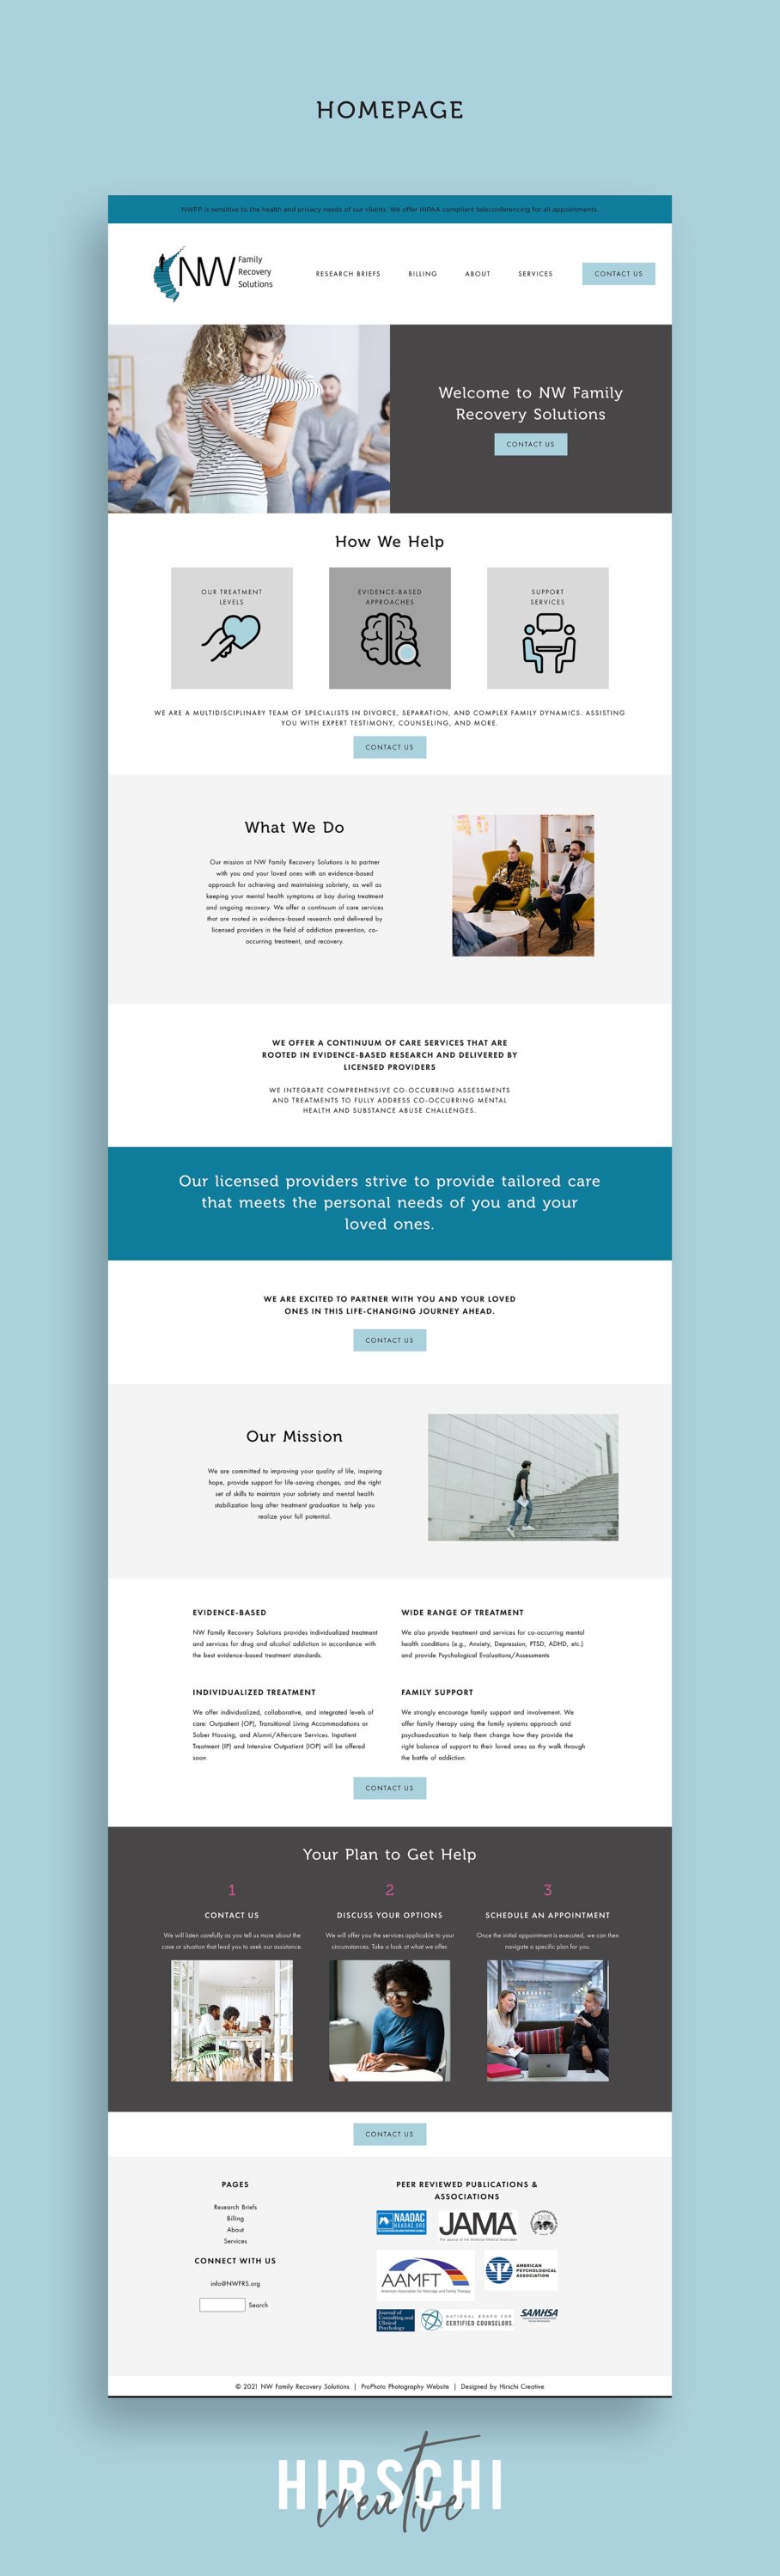 utah_website_designer_prophoto_template_styling_branding_colors_mood_design_recovery_solutions